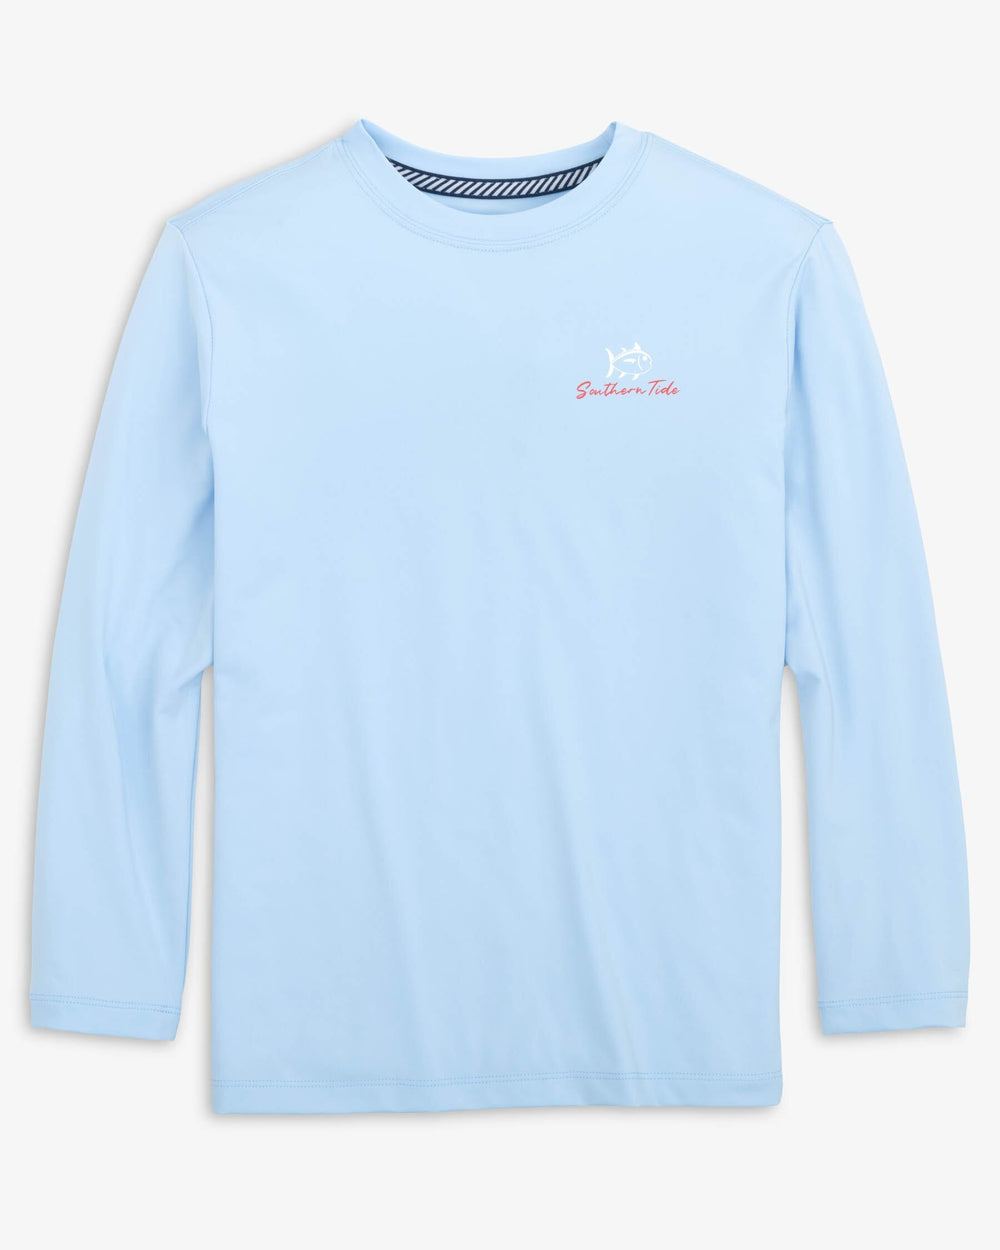 Kids Red, White, and Lure Long Sleeve Performance T-shirt